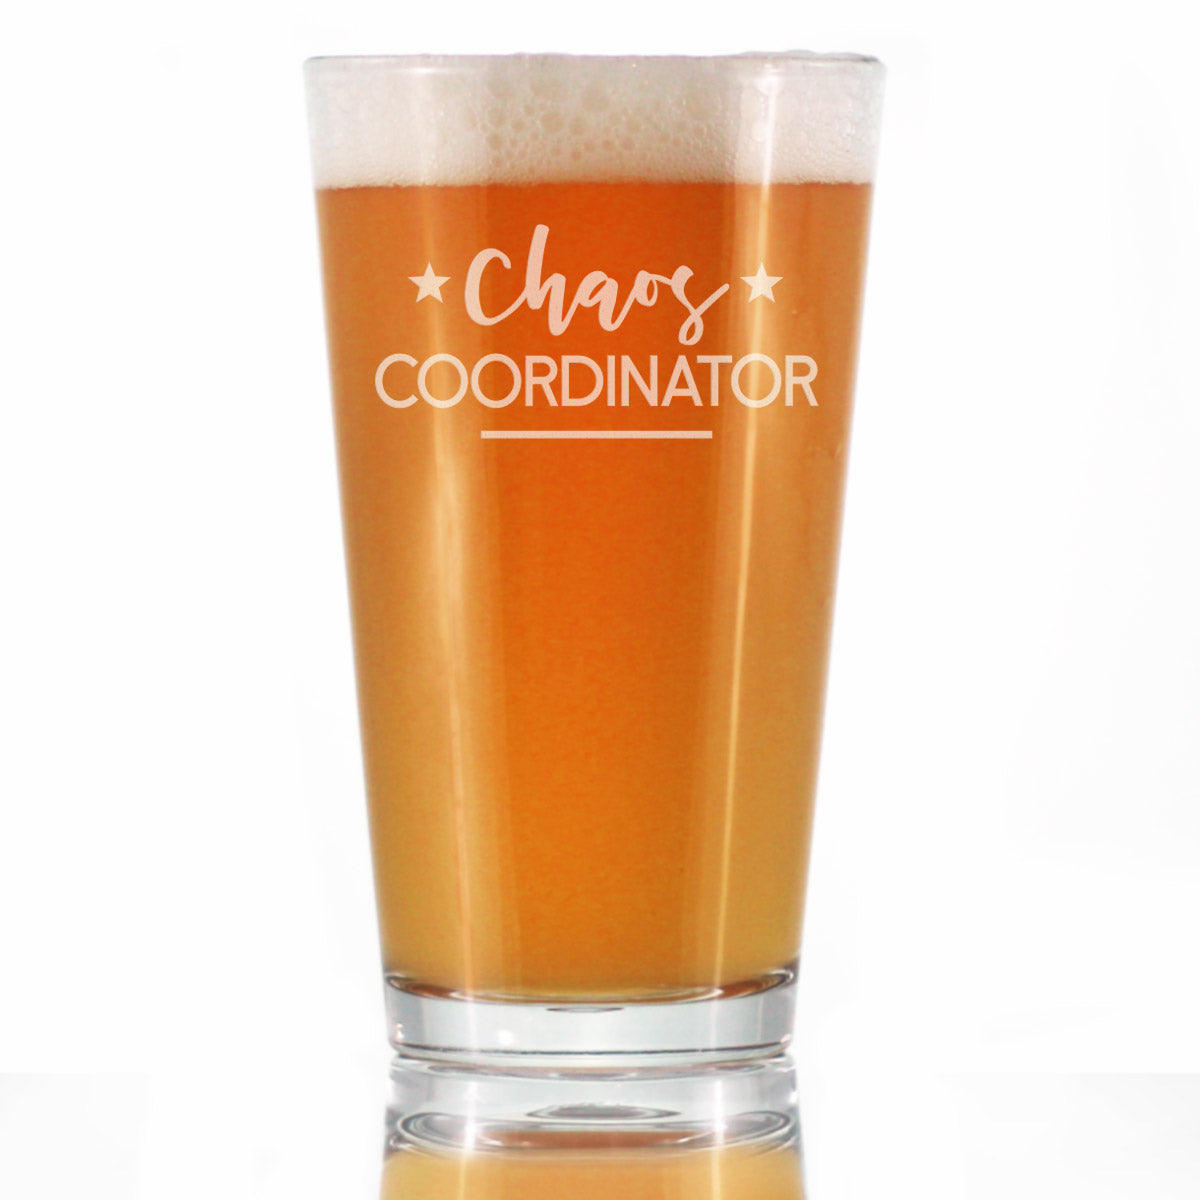 Chaos Coordinator - Pint Glass for Beer - Funny Gifts for Secretaries, Moms, and Teachers - 16 Oz Glasses